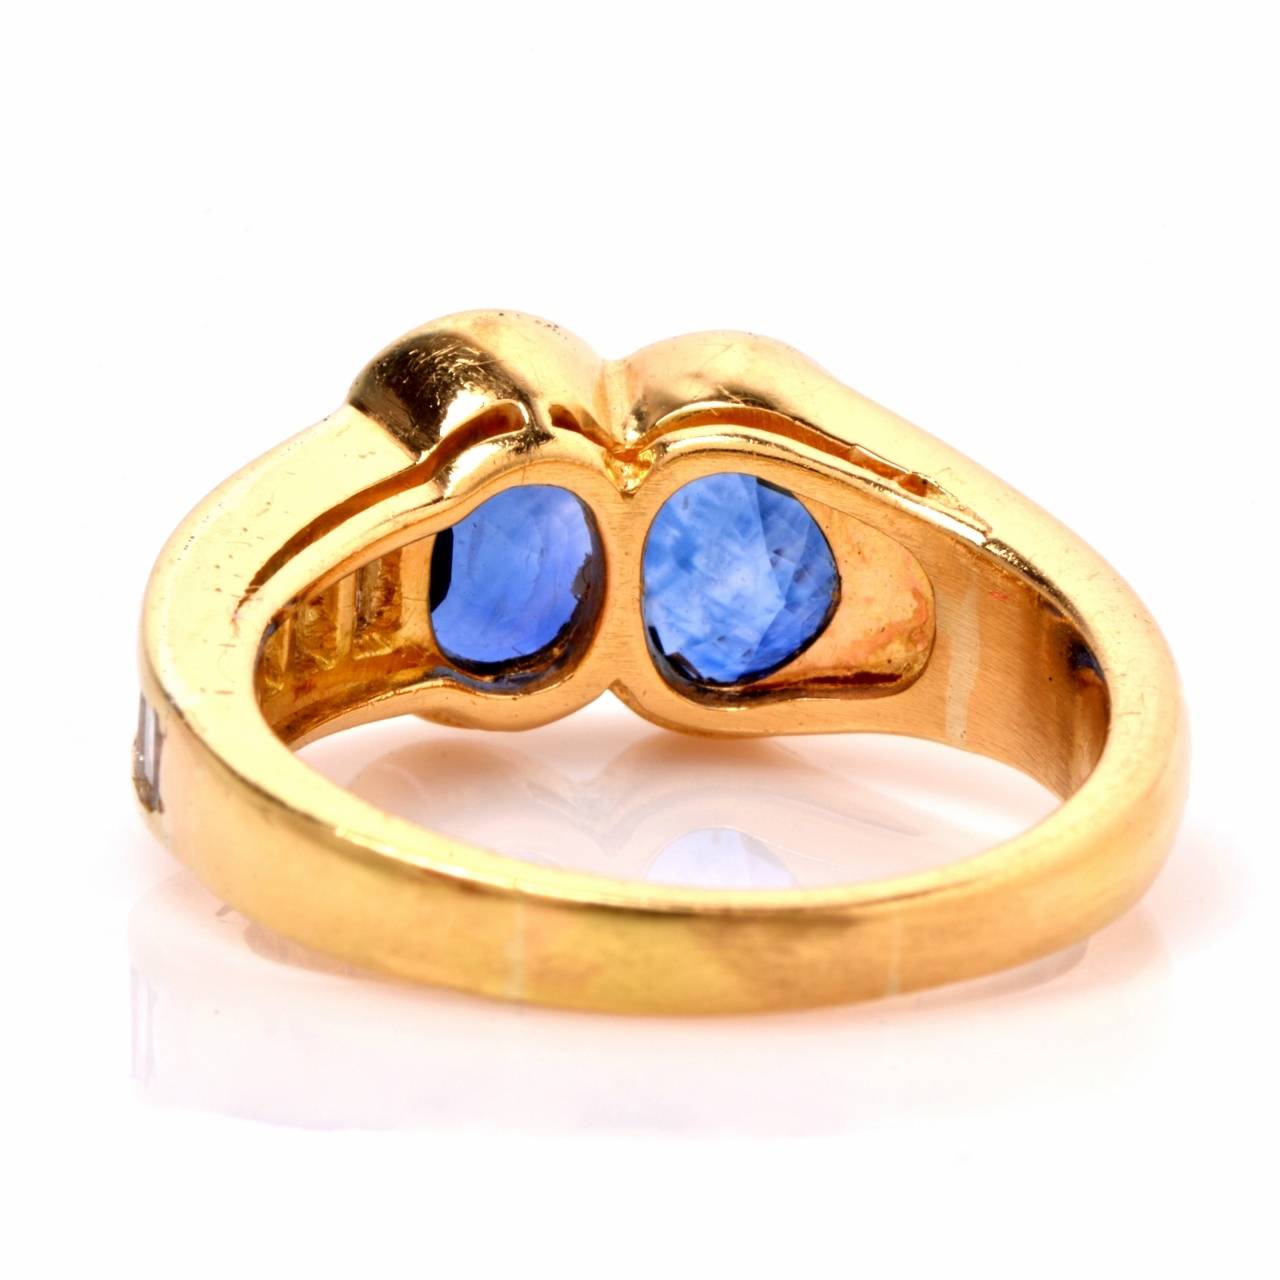 This designer  Van Cleef & Arpels ring  of notable refinement and feminine grace is crafted in 18K yellow gold and weighs 7.1 grams. Designed with romantic inspiration, the ring exposes a duo of heart shape blue sapphires, immaculately mounted